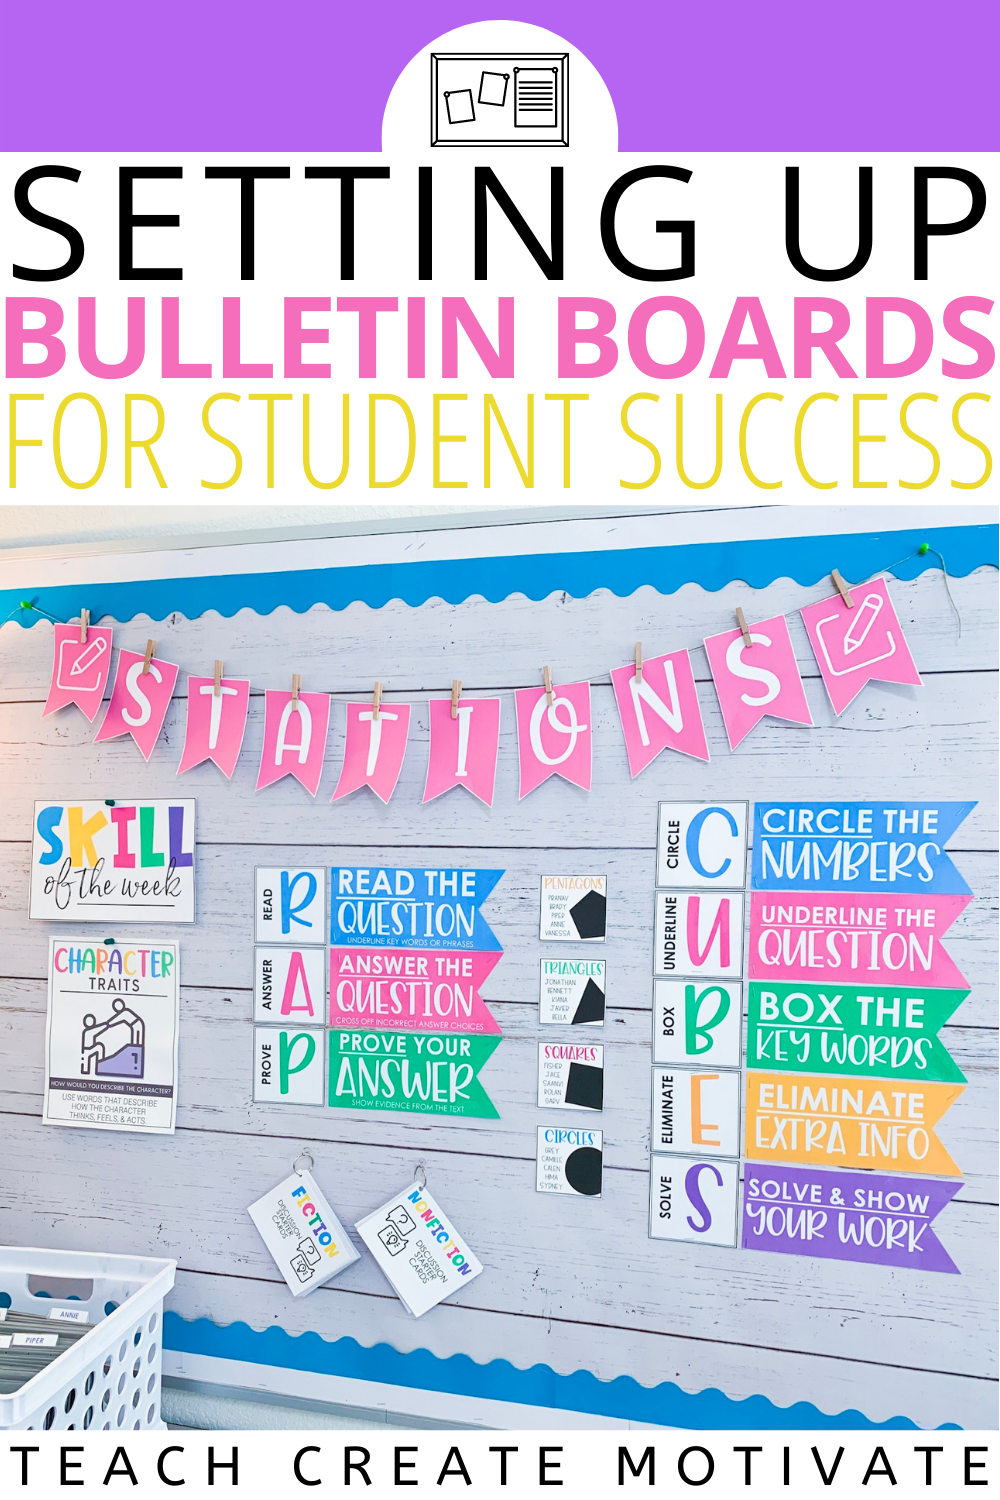 Do you use your classroom walls effectively?! A simple bulletin board can make a significant impact in the classroom. Bulletin boards are an effective way to expose students to essential skills, strategies, and concepts. Not only can they highlight important information, but they fill our classroom walls with cute and meaningful decor! Read for bulletin board setup tips, how to use wall space effectively, and more! (elementary, stations, 1st grade, 2nd grade, 3rd grade, 4th grade, 5th grade)